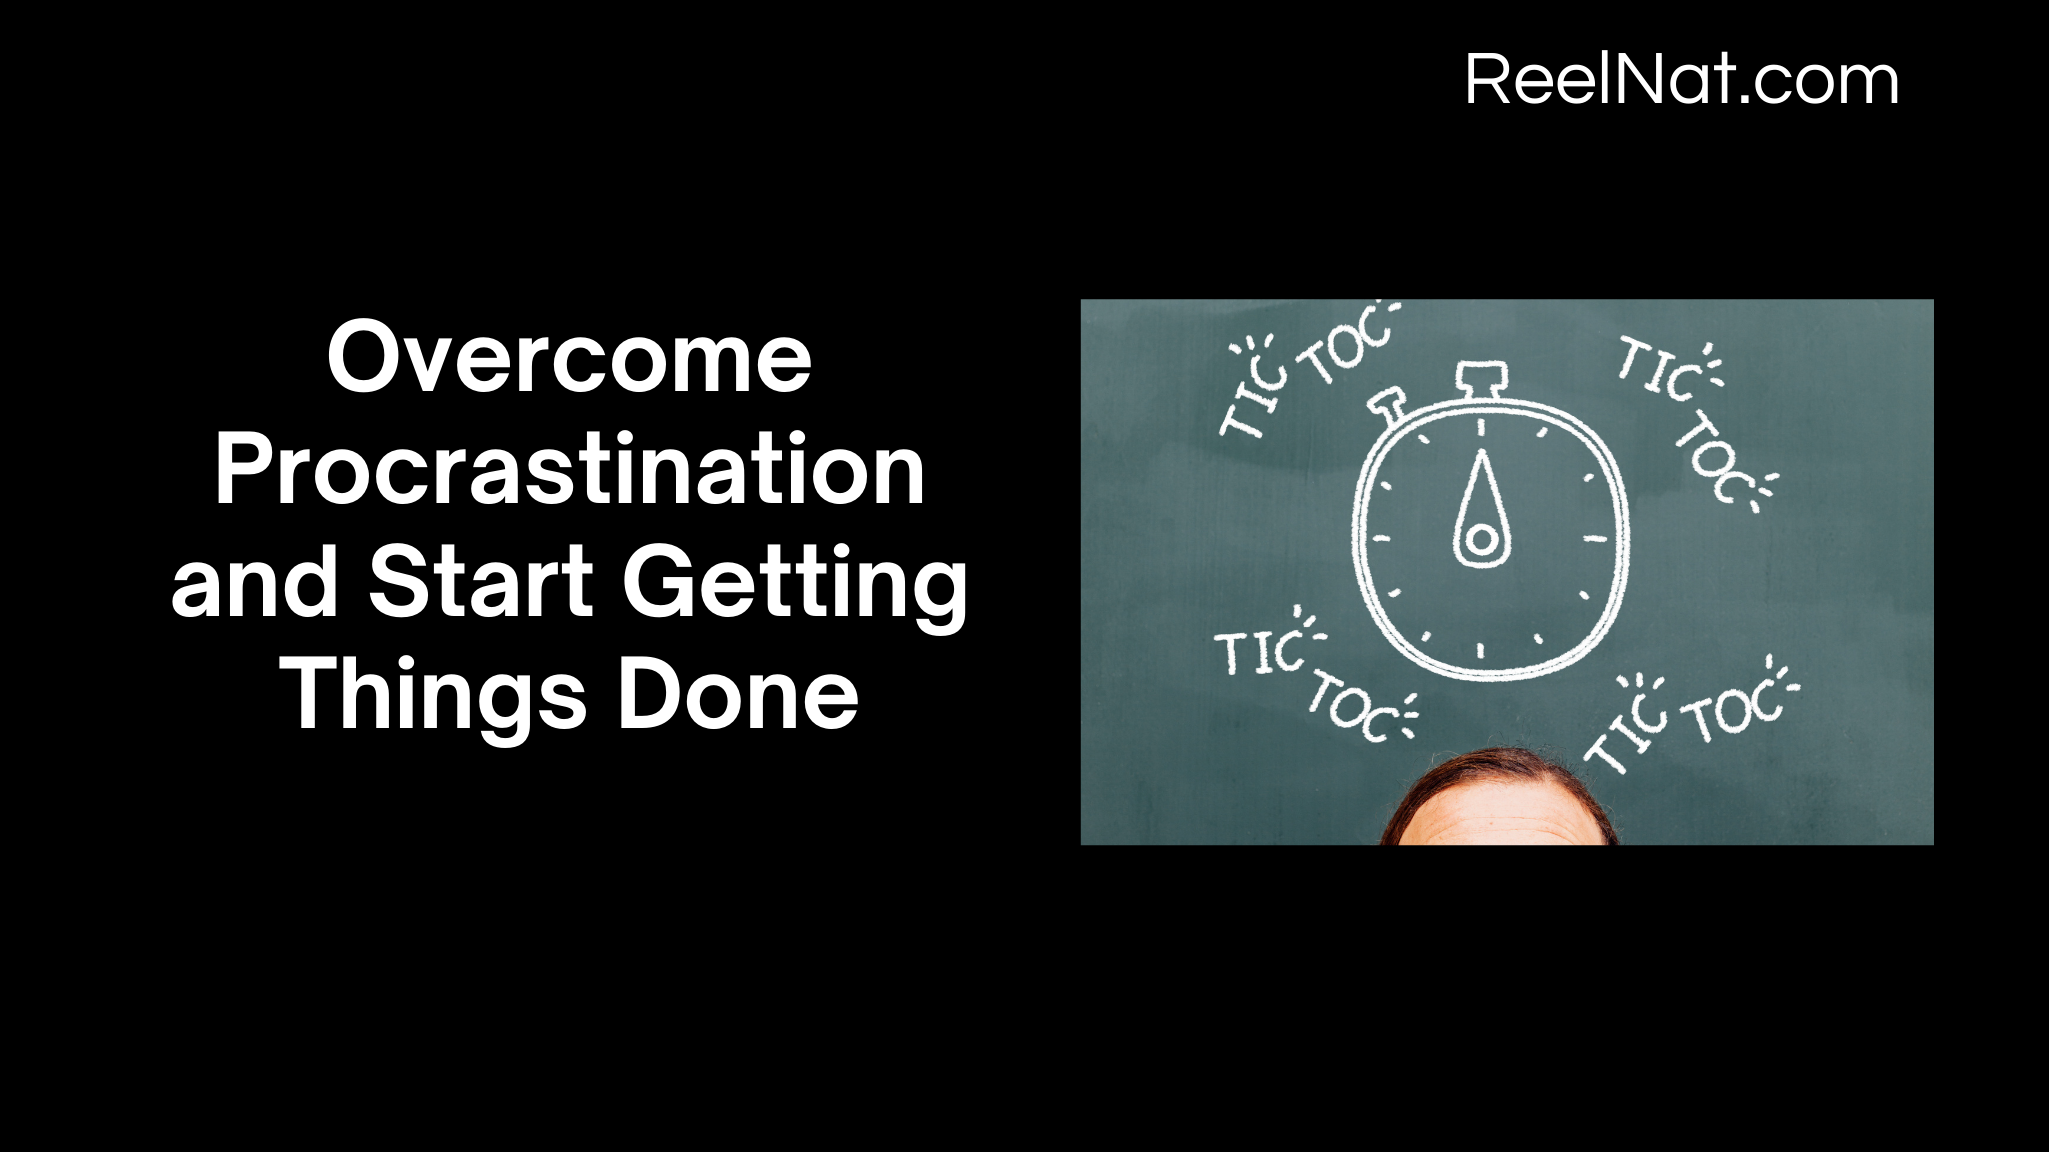 Overcome Procrastination and Start Getting Things Done